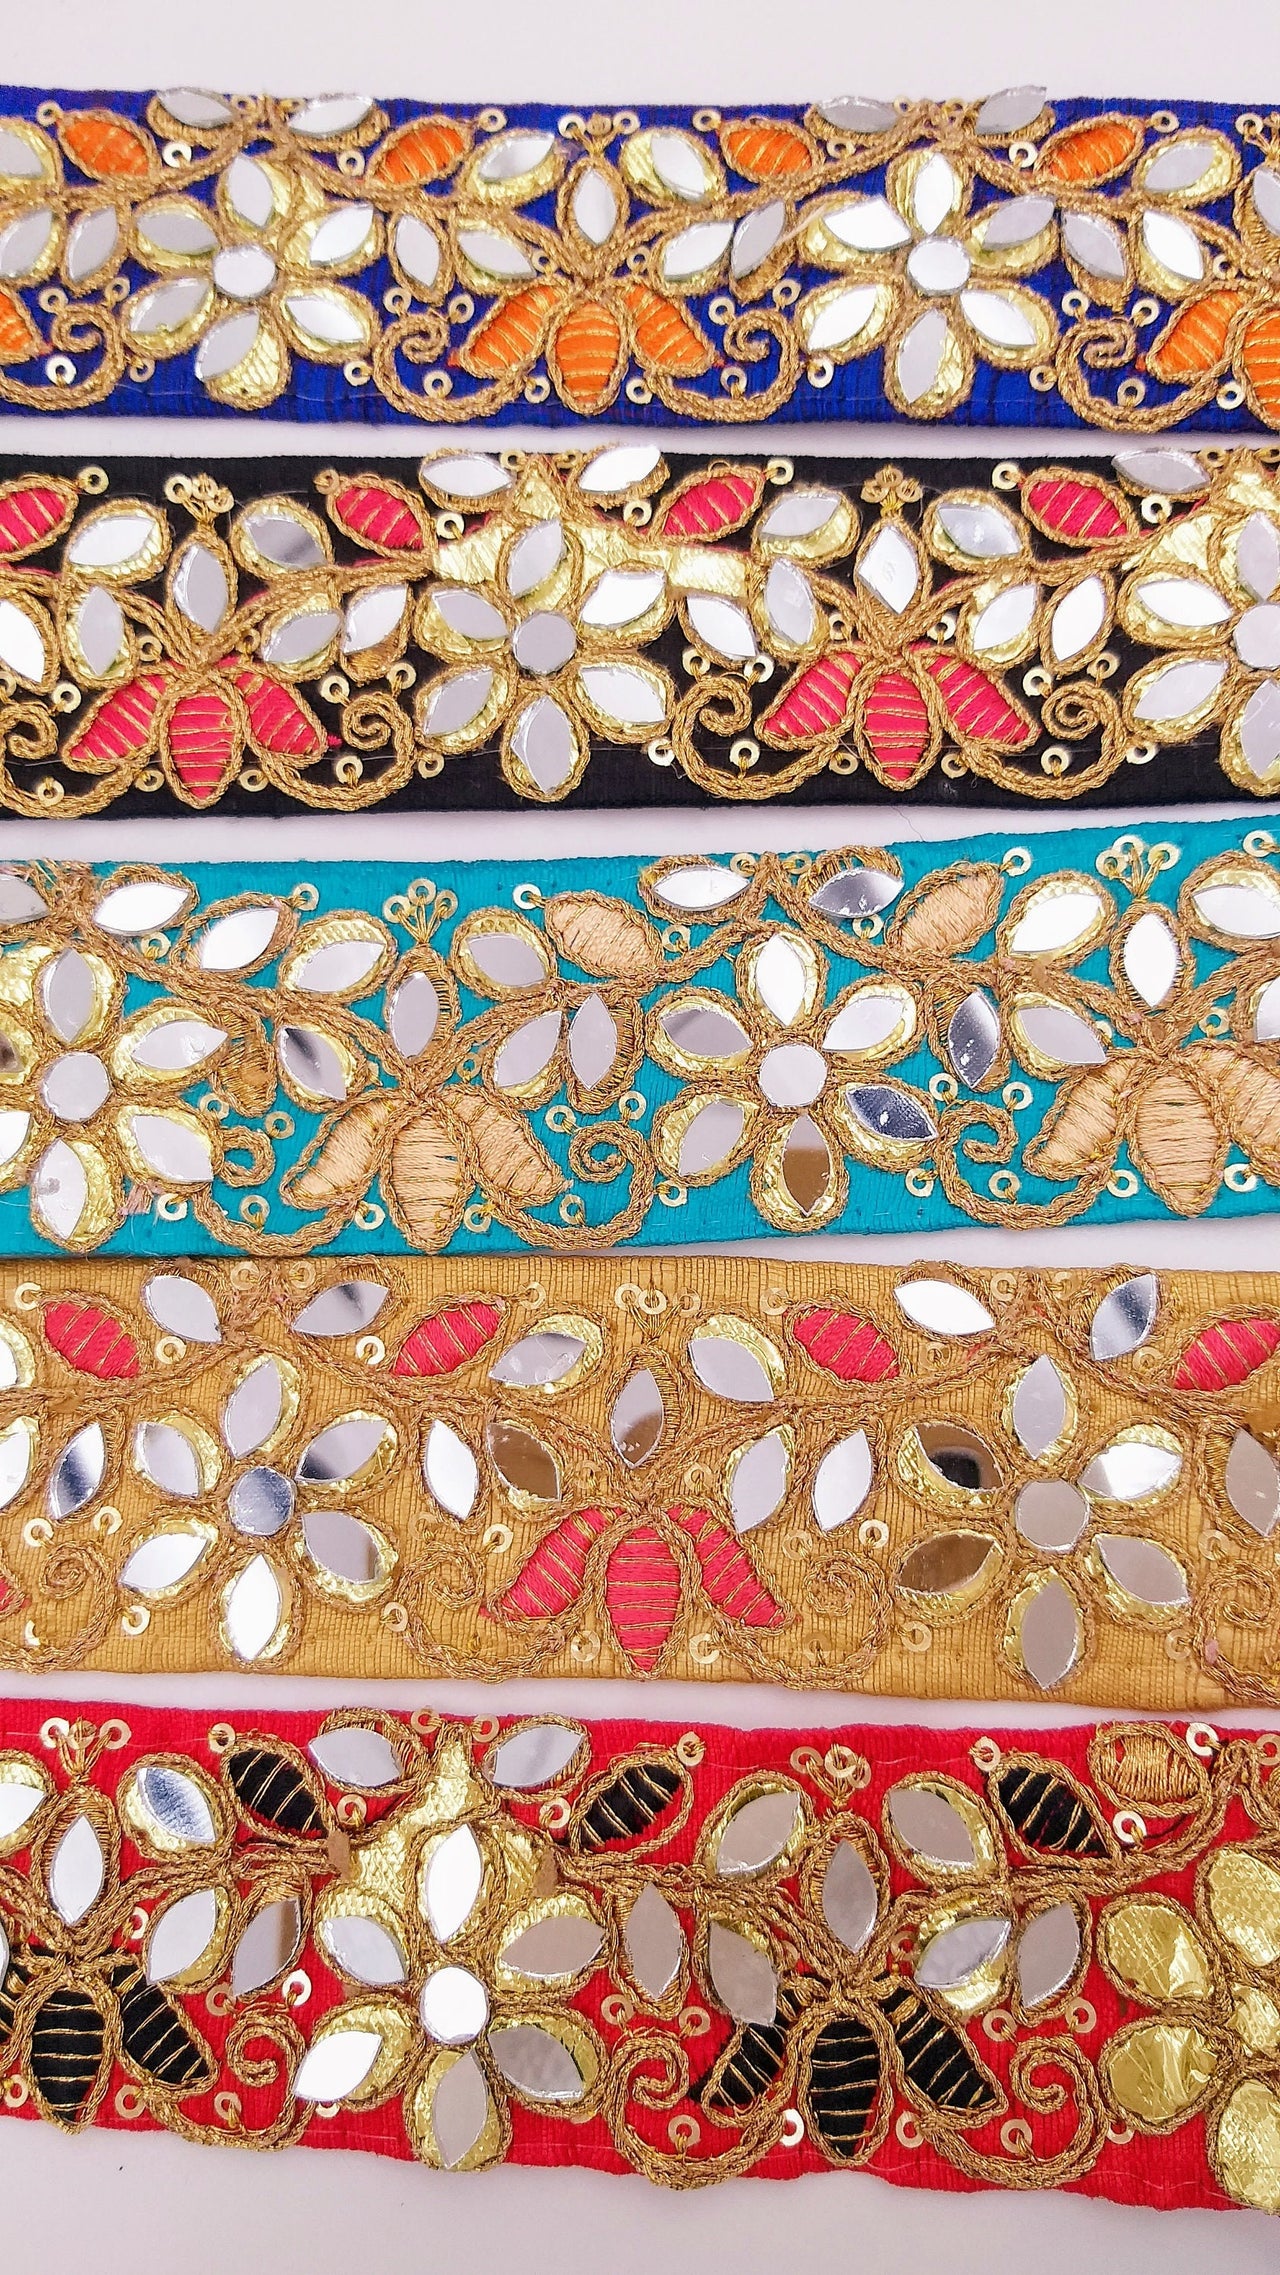 Red Decorative Art Silk Fabric Trim, Mirrored Floral Embroidery, Embroidered Trim In Black and Gold Approx. 40 mm Indian Laces